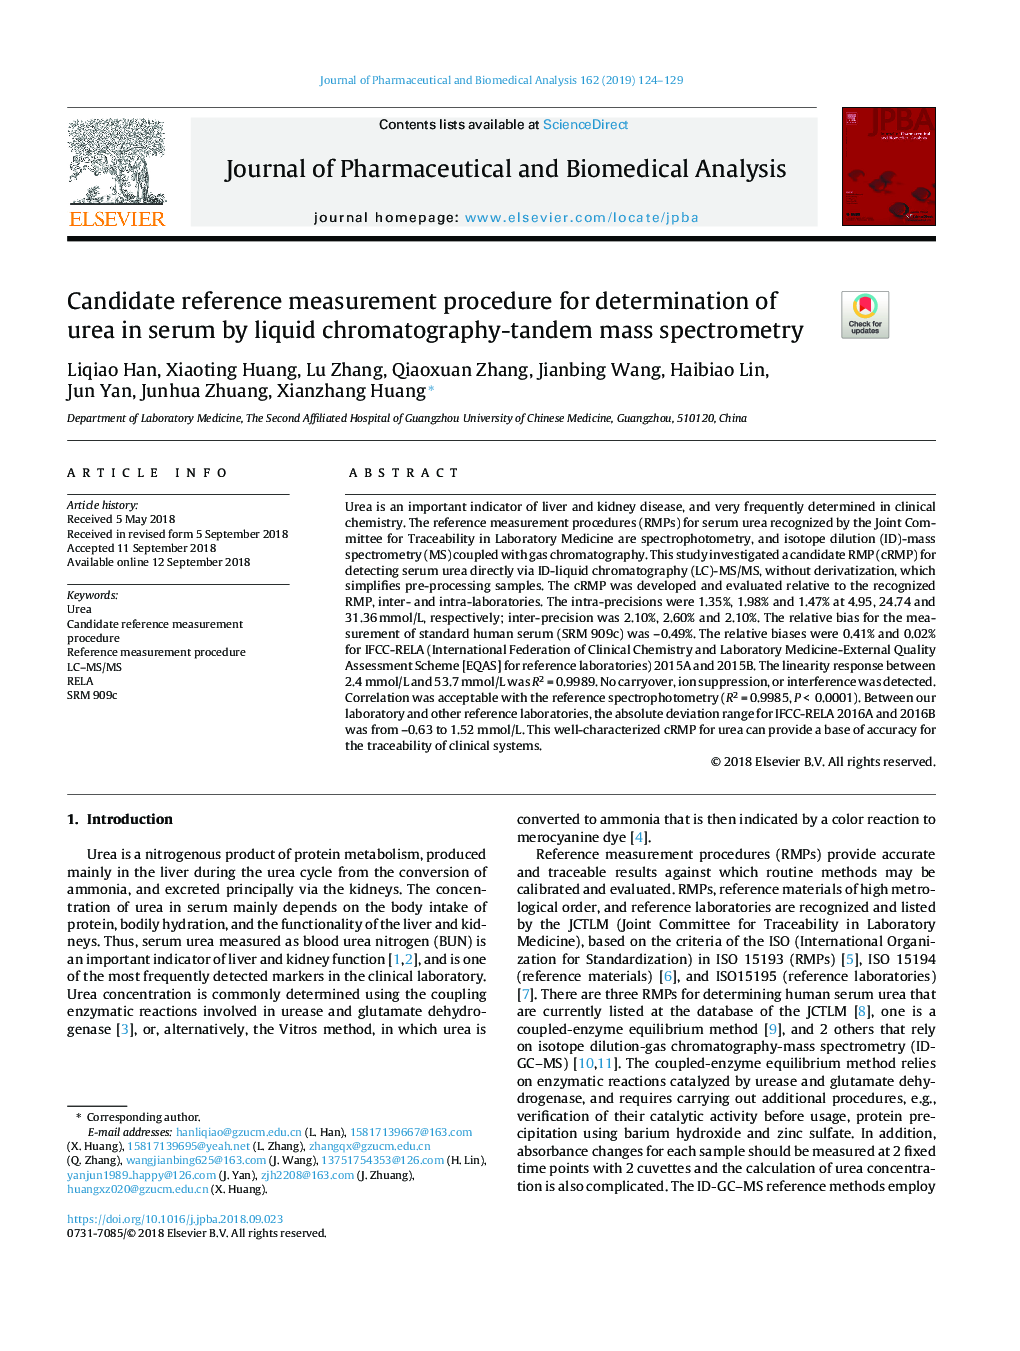 Candidate reference measurement procedure for determination of urea in serum by liquid chromatography-tandem mass spectrometry